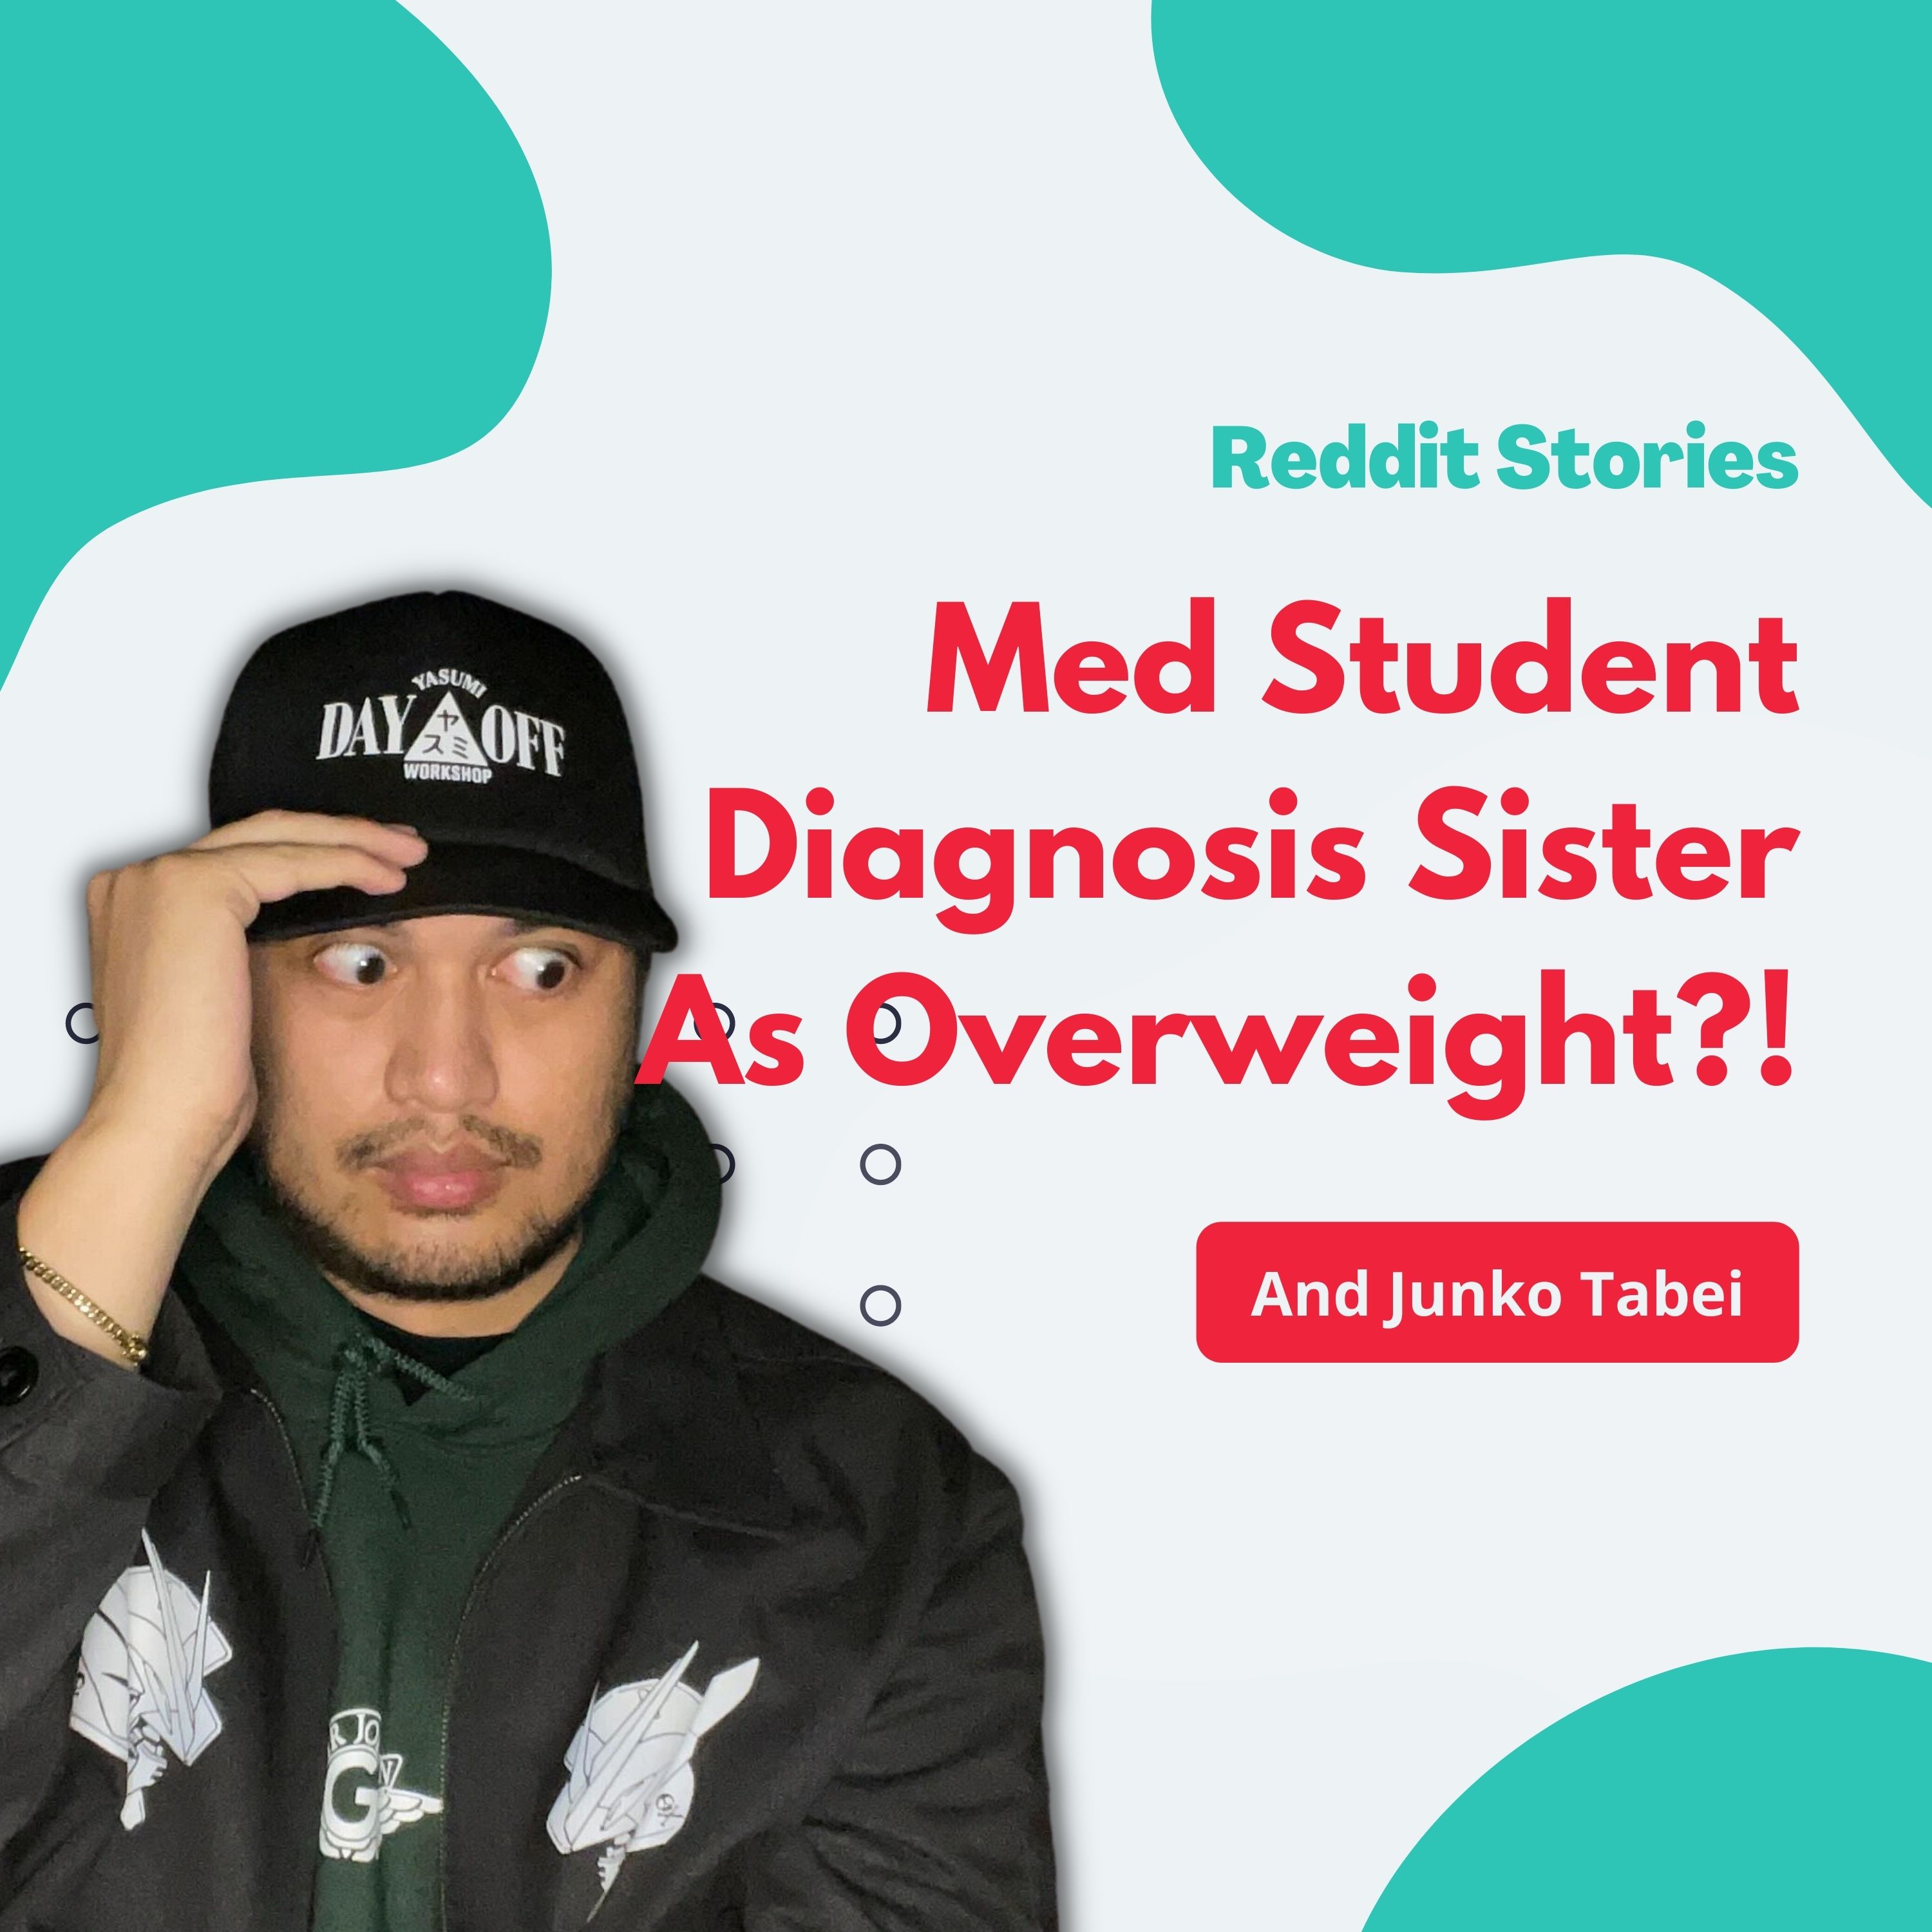 Reddit Stories | Med Student Diagnosis Their Sister As Overweight!